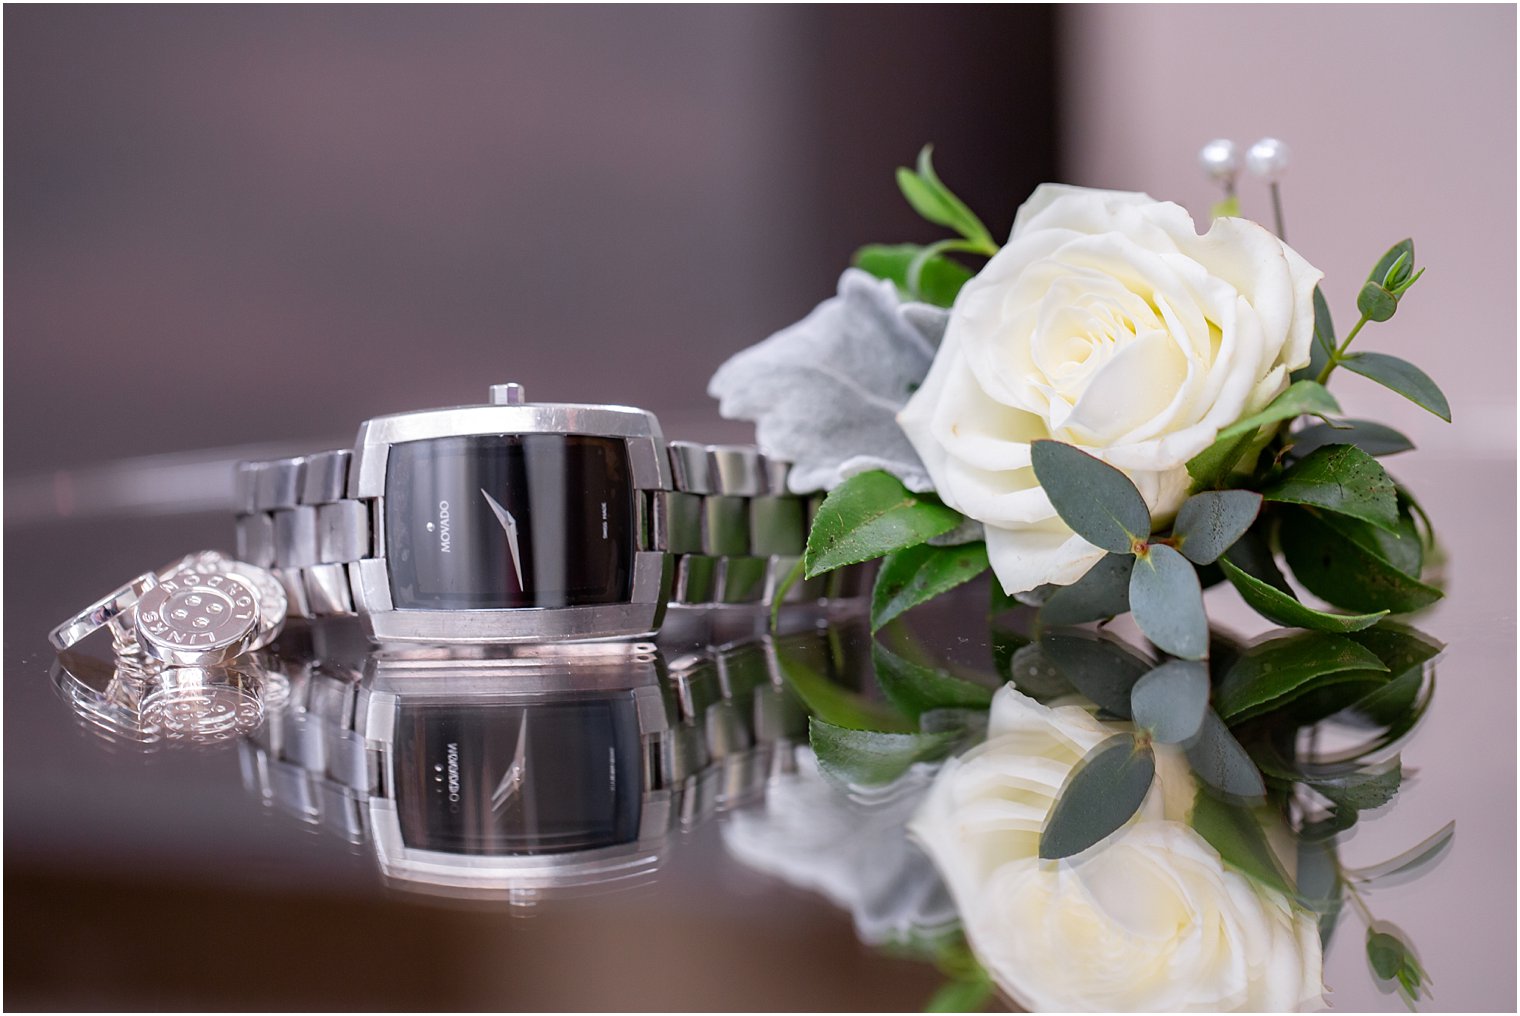 groom's watch, cufflinks and boutonnière by Flowerful Events in Long Branch, NJ